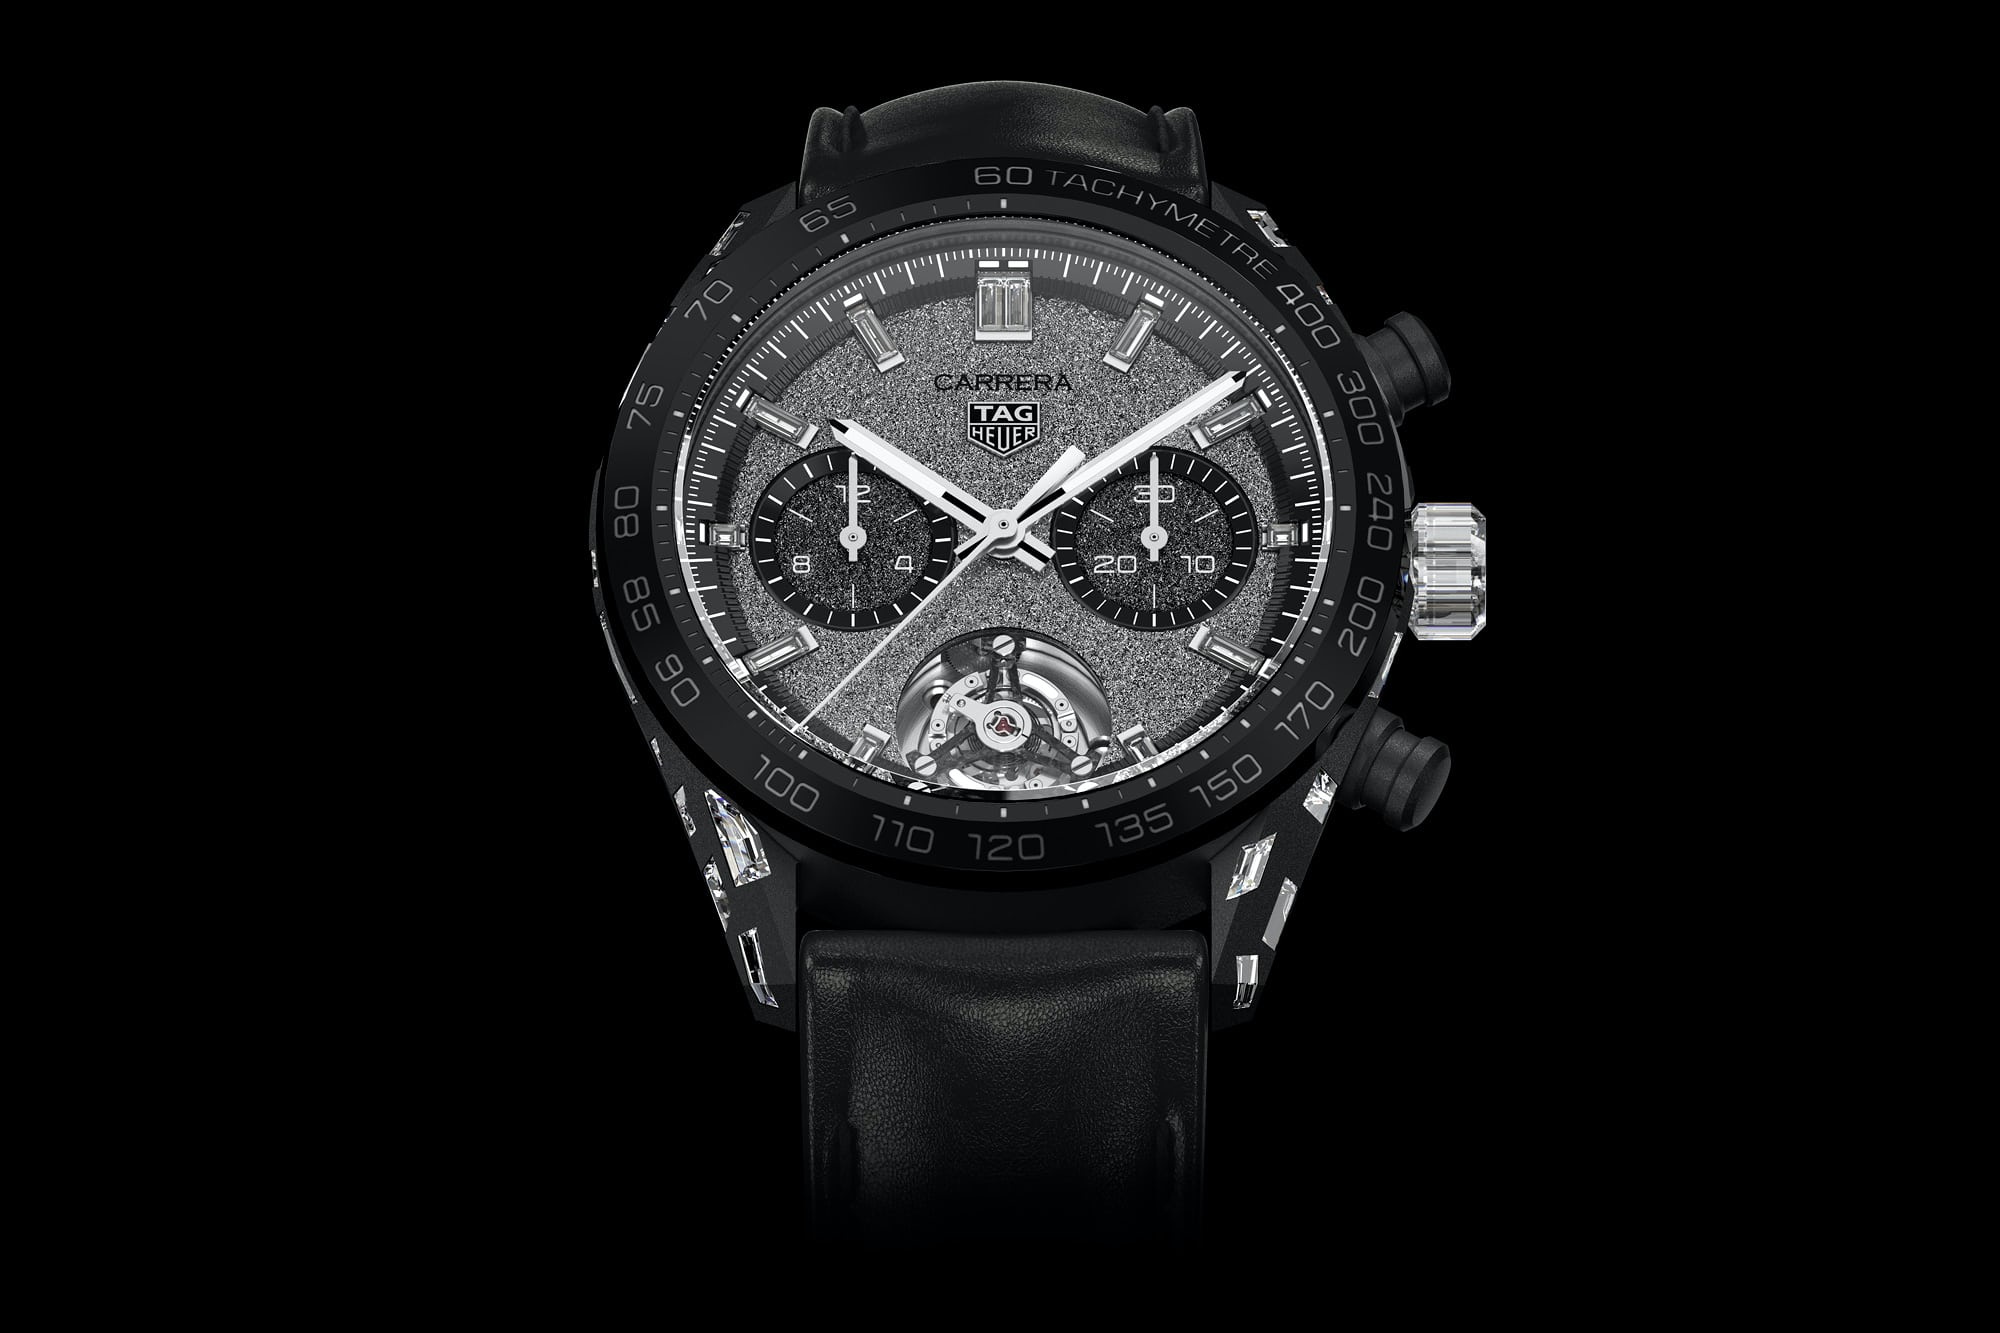 Raising a glass to the TAG Heuer Carrera